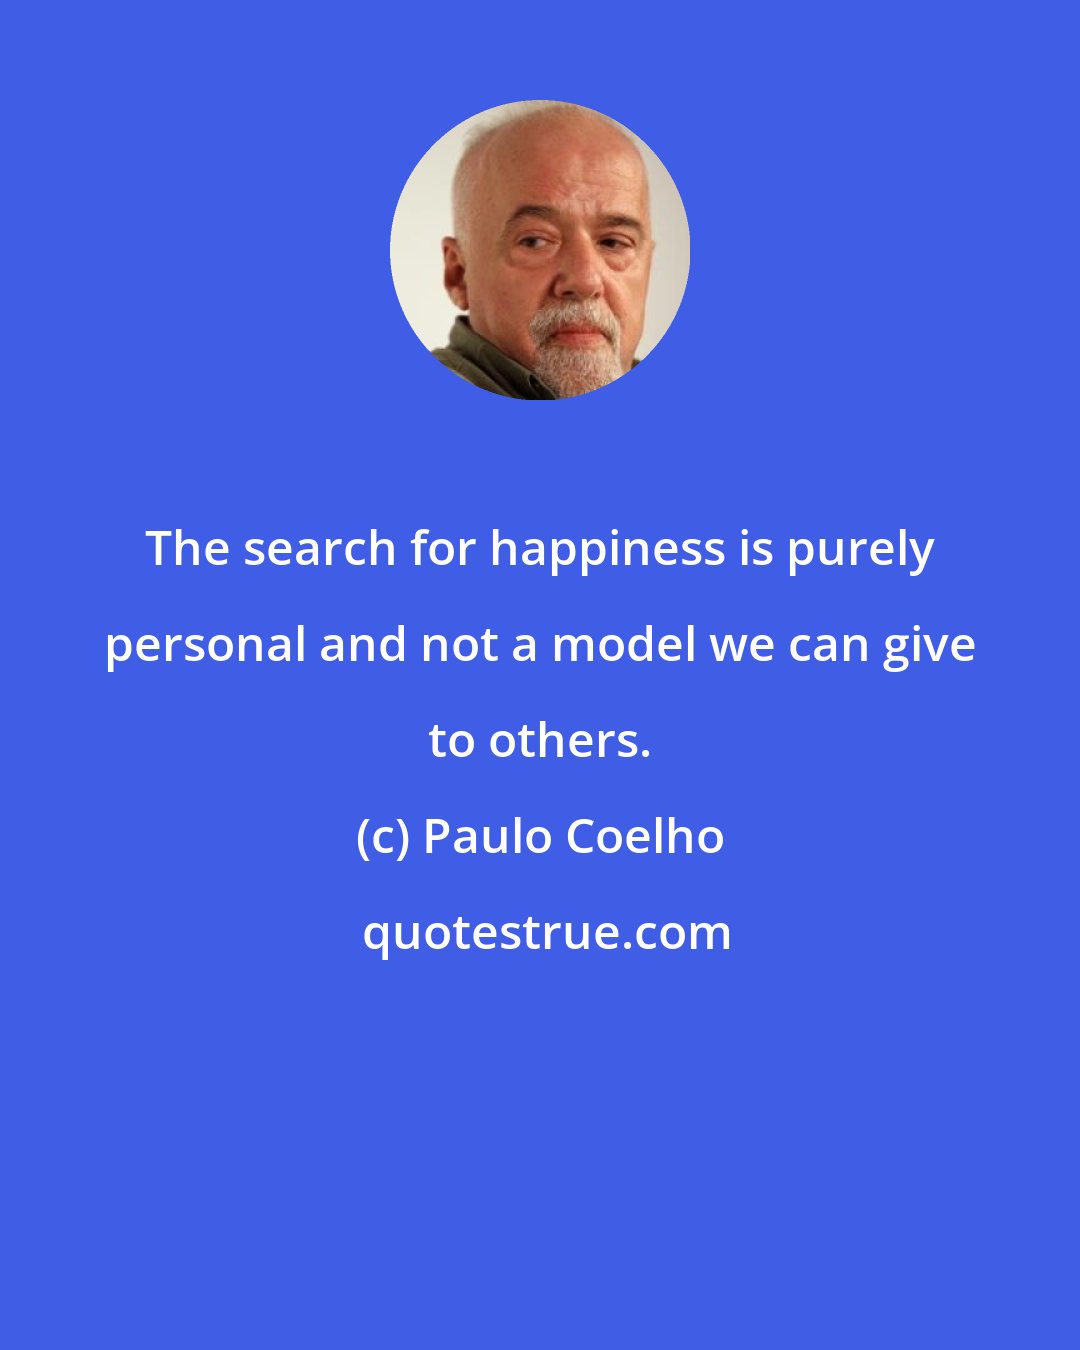 Paulo Coelho: The search for happiness is purely personal and not a model we can give to others.